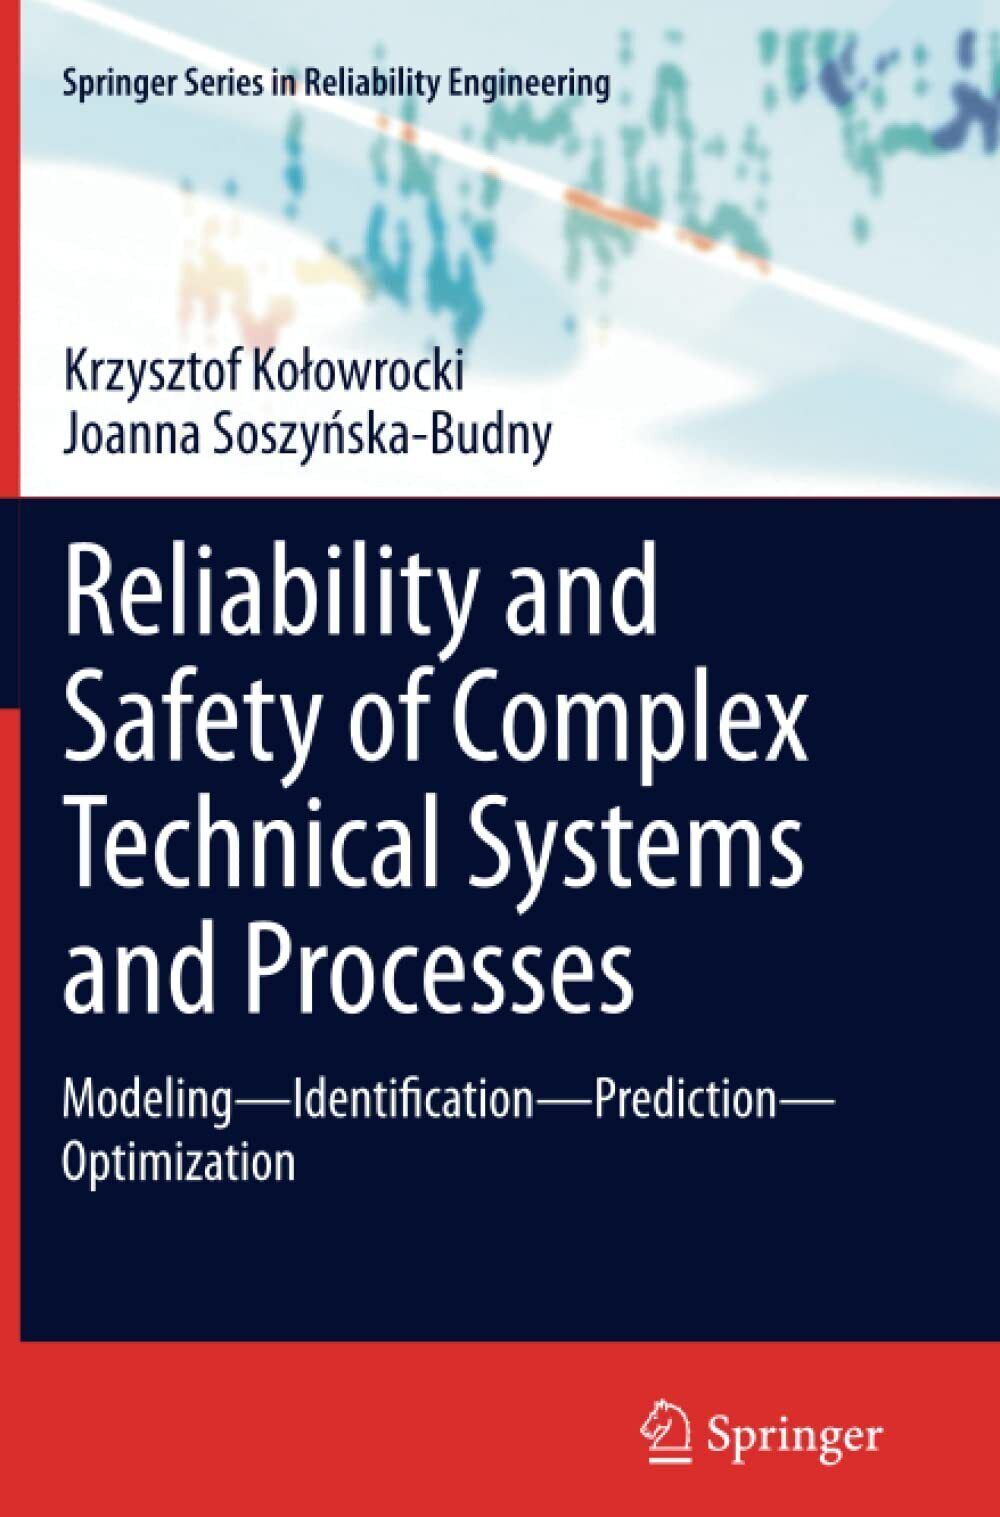 Reliability and Safety of Complex Technical Systems and Processes -Springer,2013 libro usato